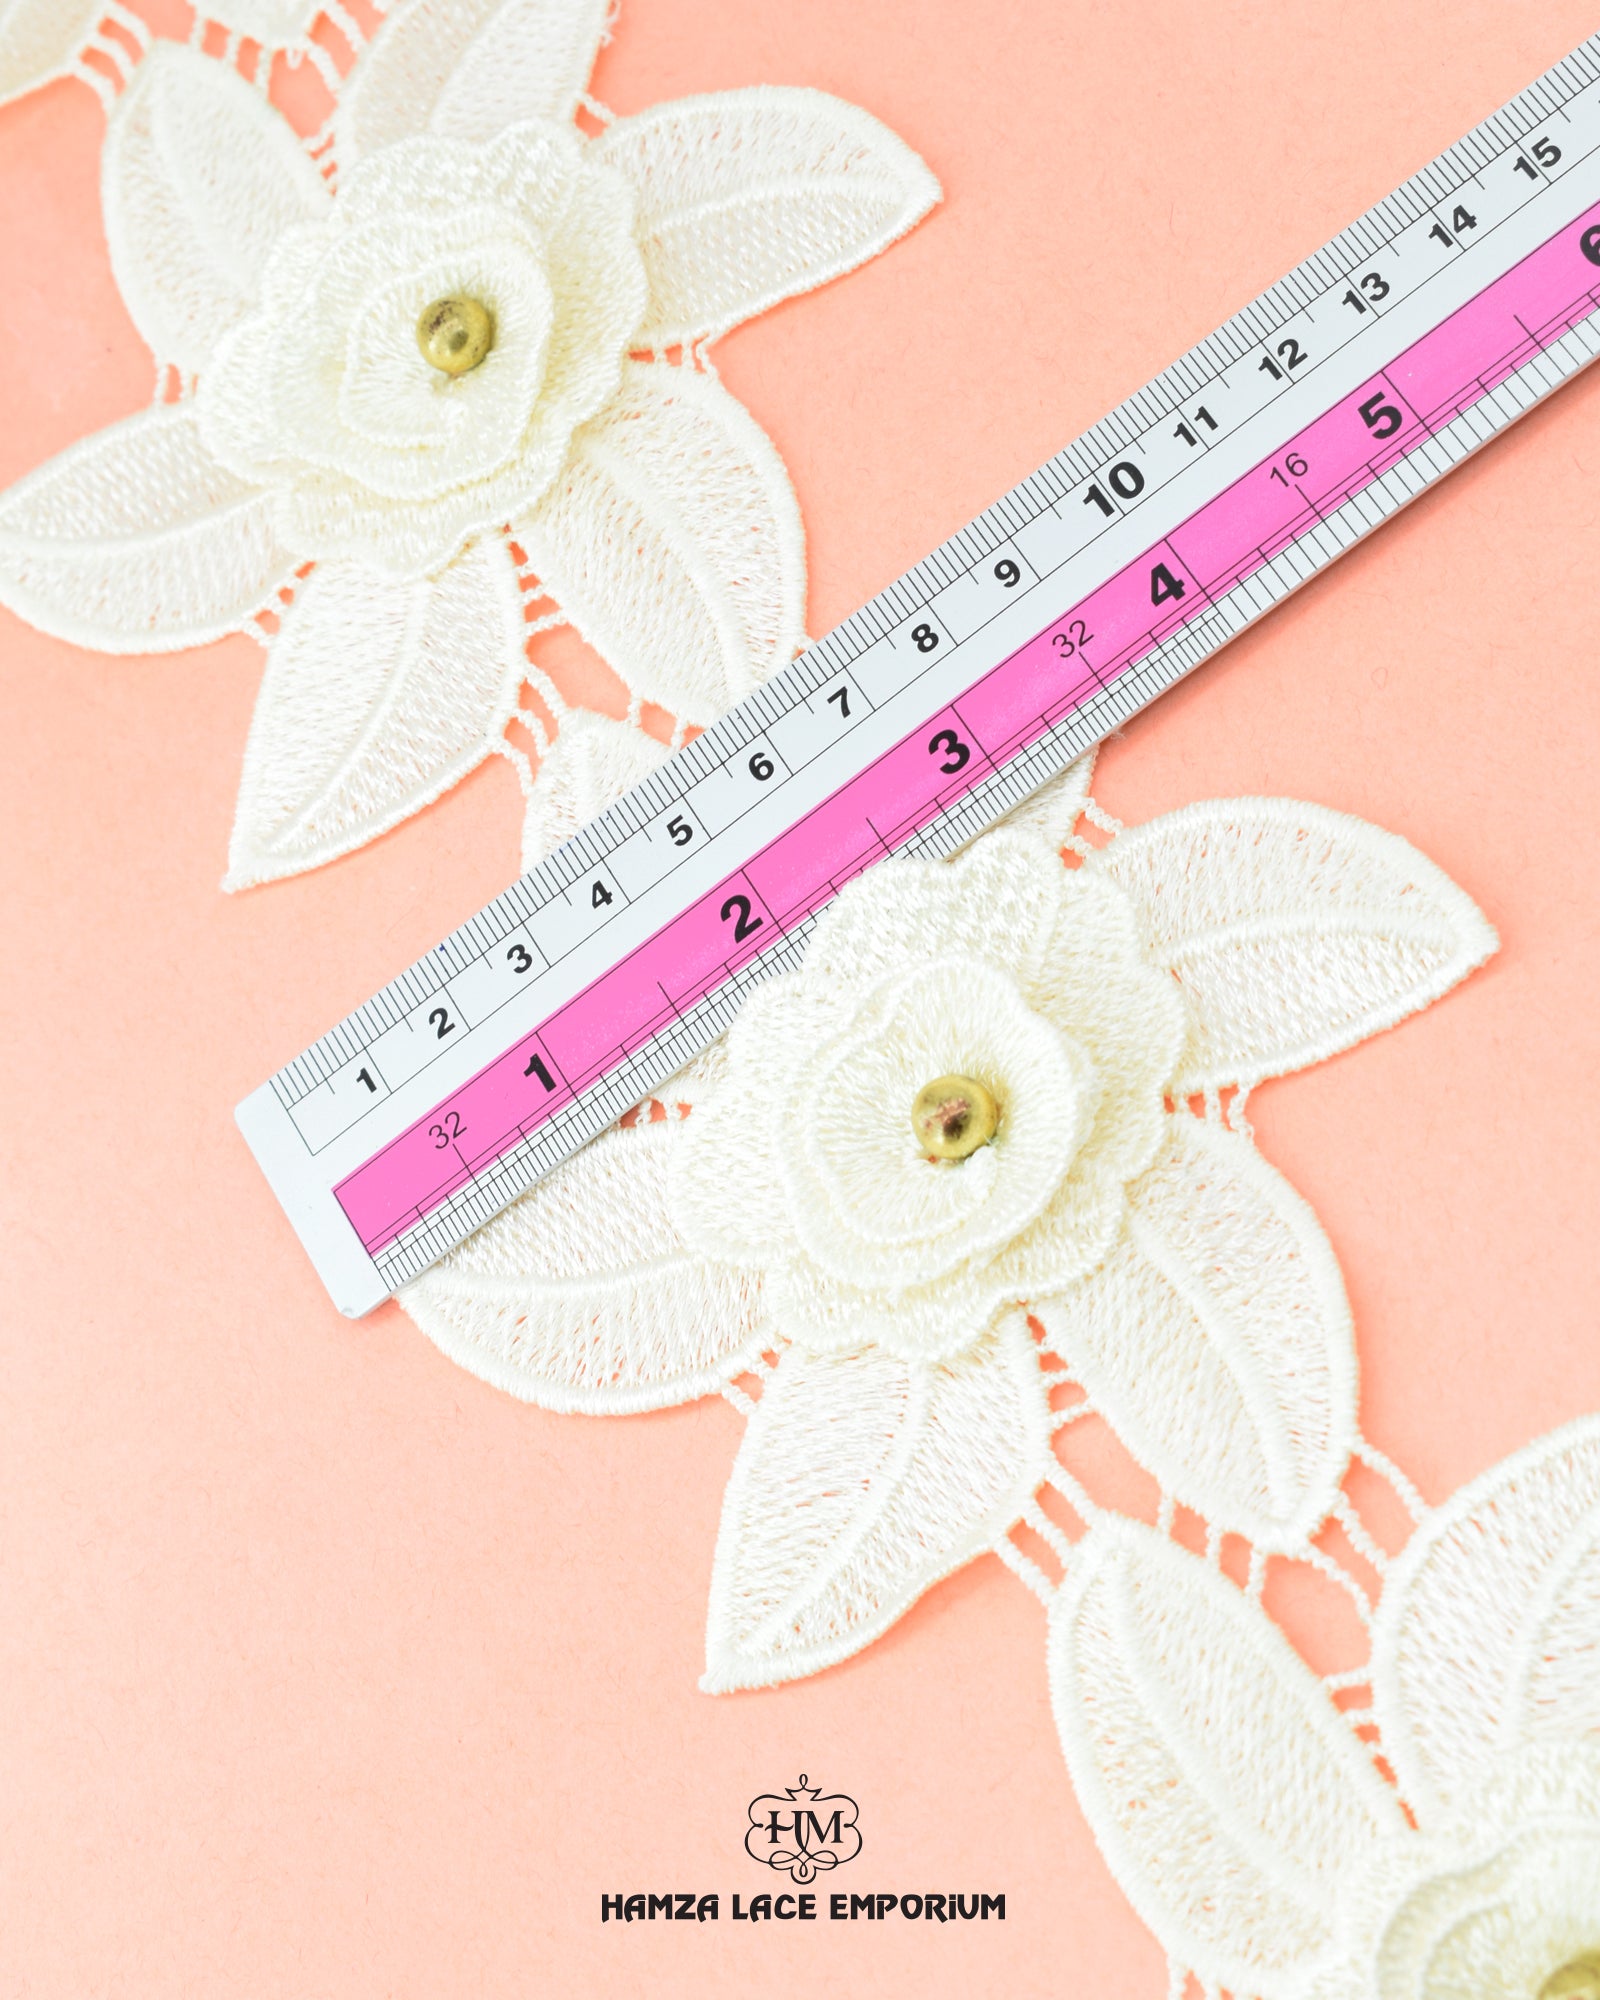 The size of the 'Center Tilla Flower Lace 22886' is given with the help of a ruler.